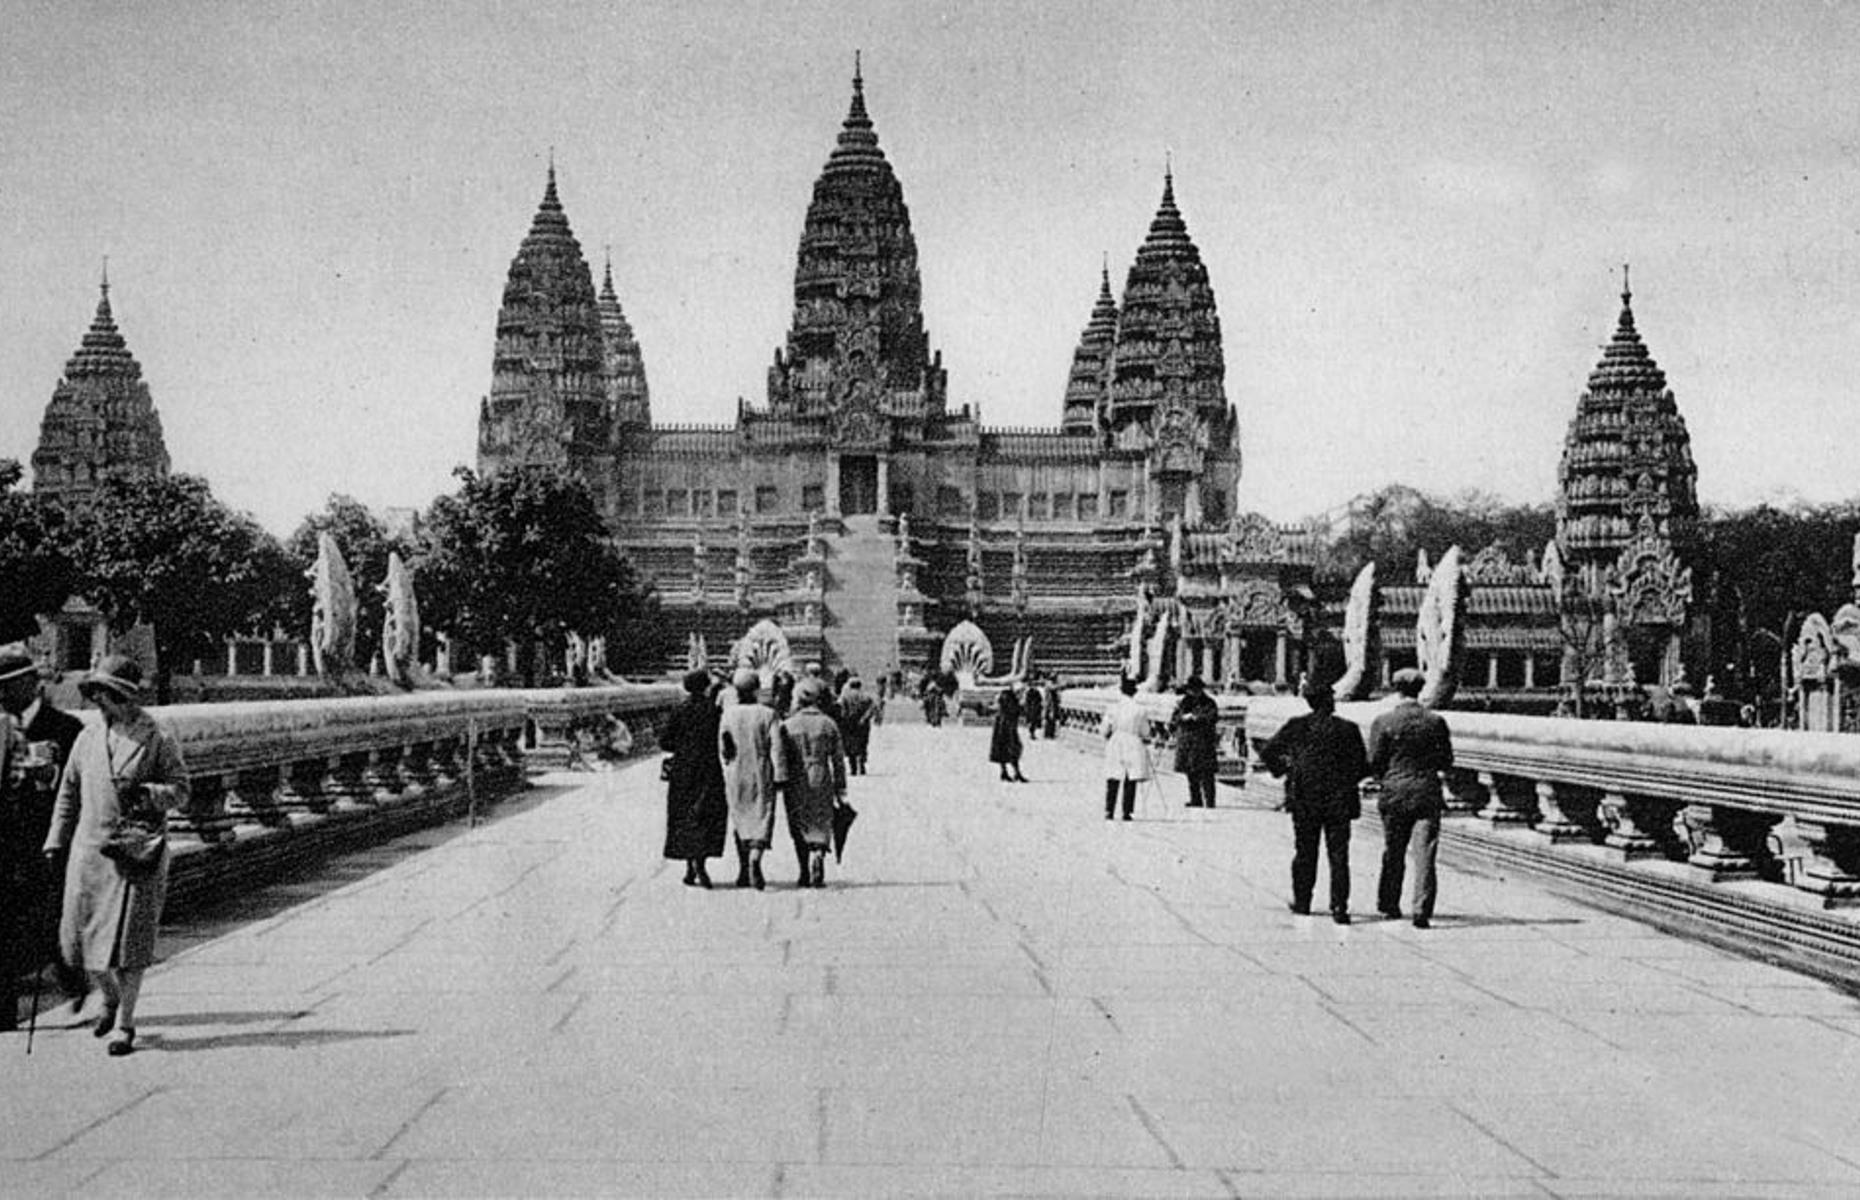 <p>Angkor Wat's fame increased in the 1930s when a life-size replica was made of the complex for the Paris Colonial Exposition in 1931. By 1953, Cambodia had gained independence from France and the temple site was given UNESCO World Heritage status in 1992. At this point, only about 7,650 tourists visited the site. But, in the 21st century, it's one of the most popular destinations in Asia, especially after the filming of <em>Tomb Raider</em> with Angelina Jolie in 2001.</p>  <p><a href="https://www.loveexploring.com/gallerylist/81102/new-secrets-of-the-worlds-ancient-wonders-revealed"><strong>Discover the incredible new secrets of the world's ancient wonders</strong></a></p>